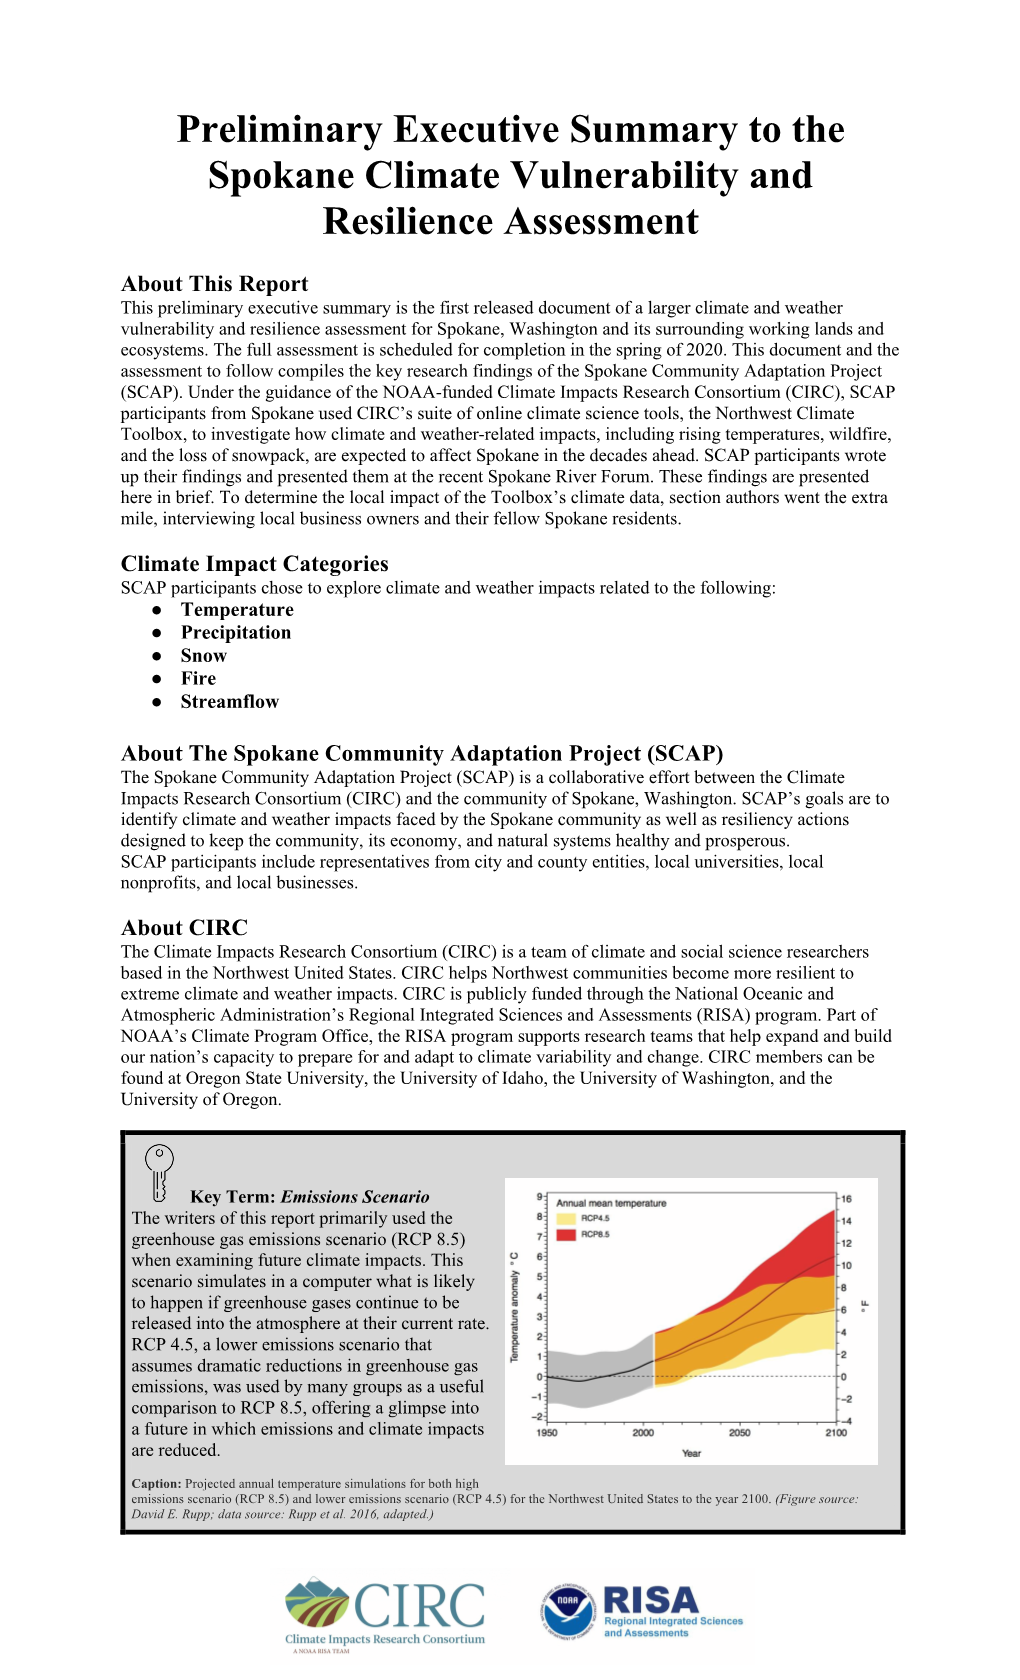 Preliminary Executive Summary to the Spokane Climate Vulnerability and Resilience Assessment